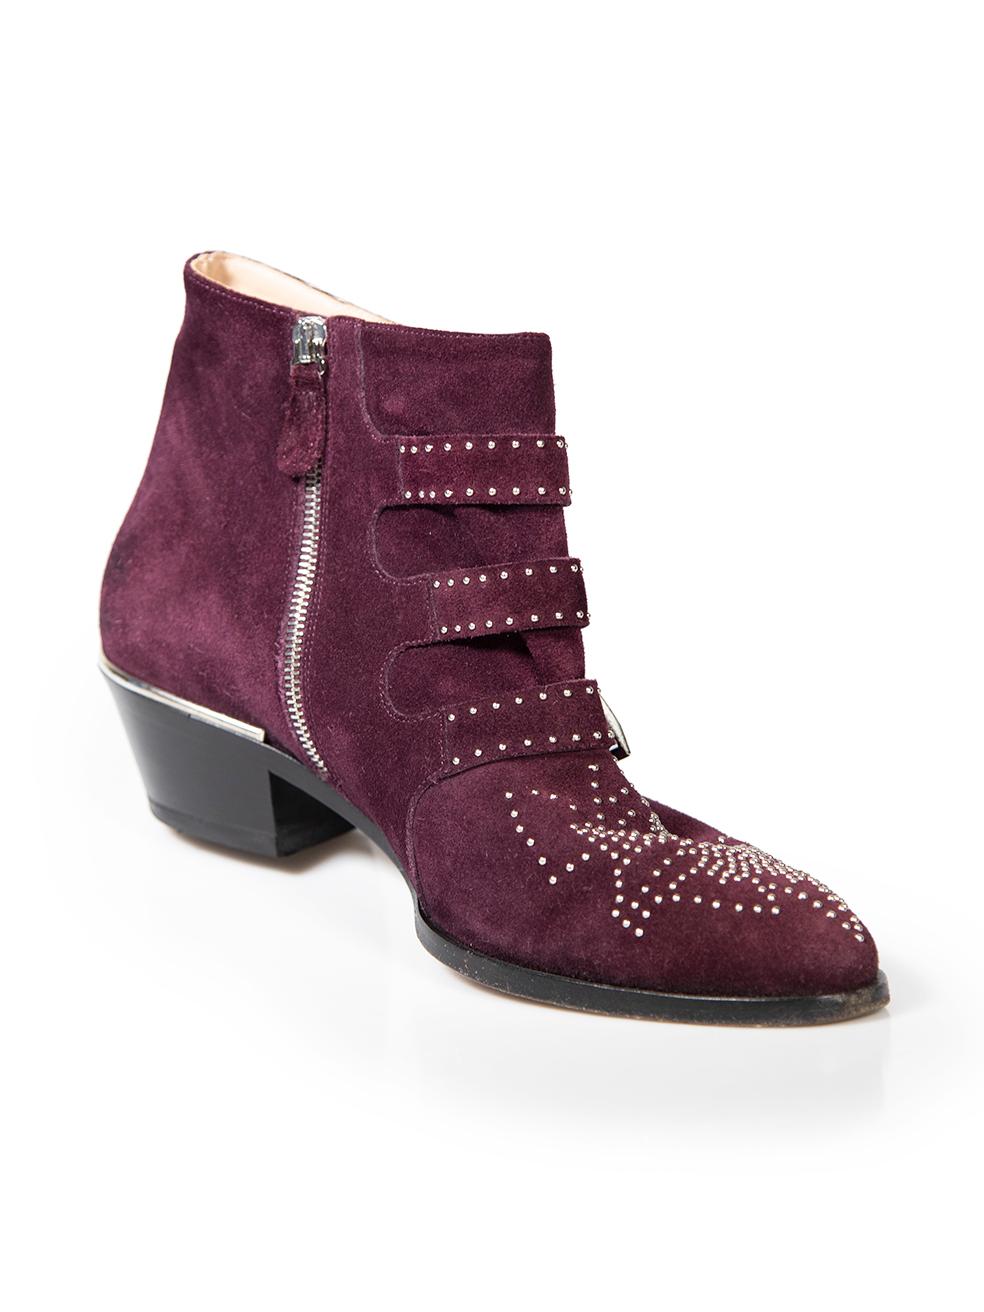 CONDITION is Very good. Minimal wear to boots is evident. Minimal wear to both boot soles with abrasions on this used Chloé designer resale item. These boots come with original dust bags.
 
Details
Model: Susanna
Purple
Suede
Ankle boots
Almond